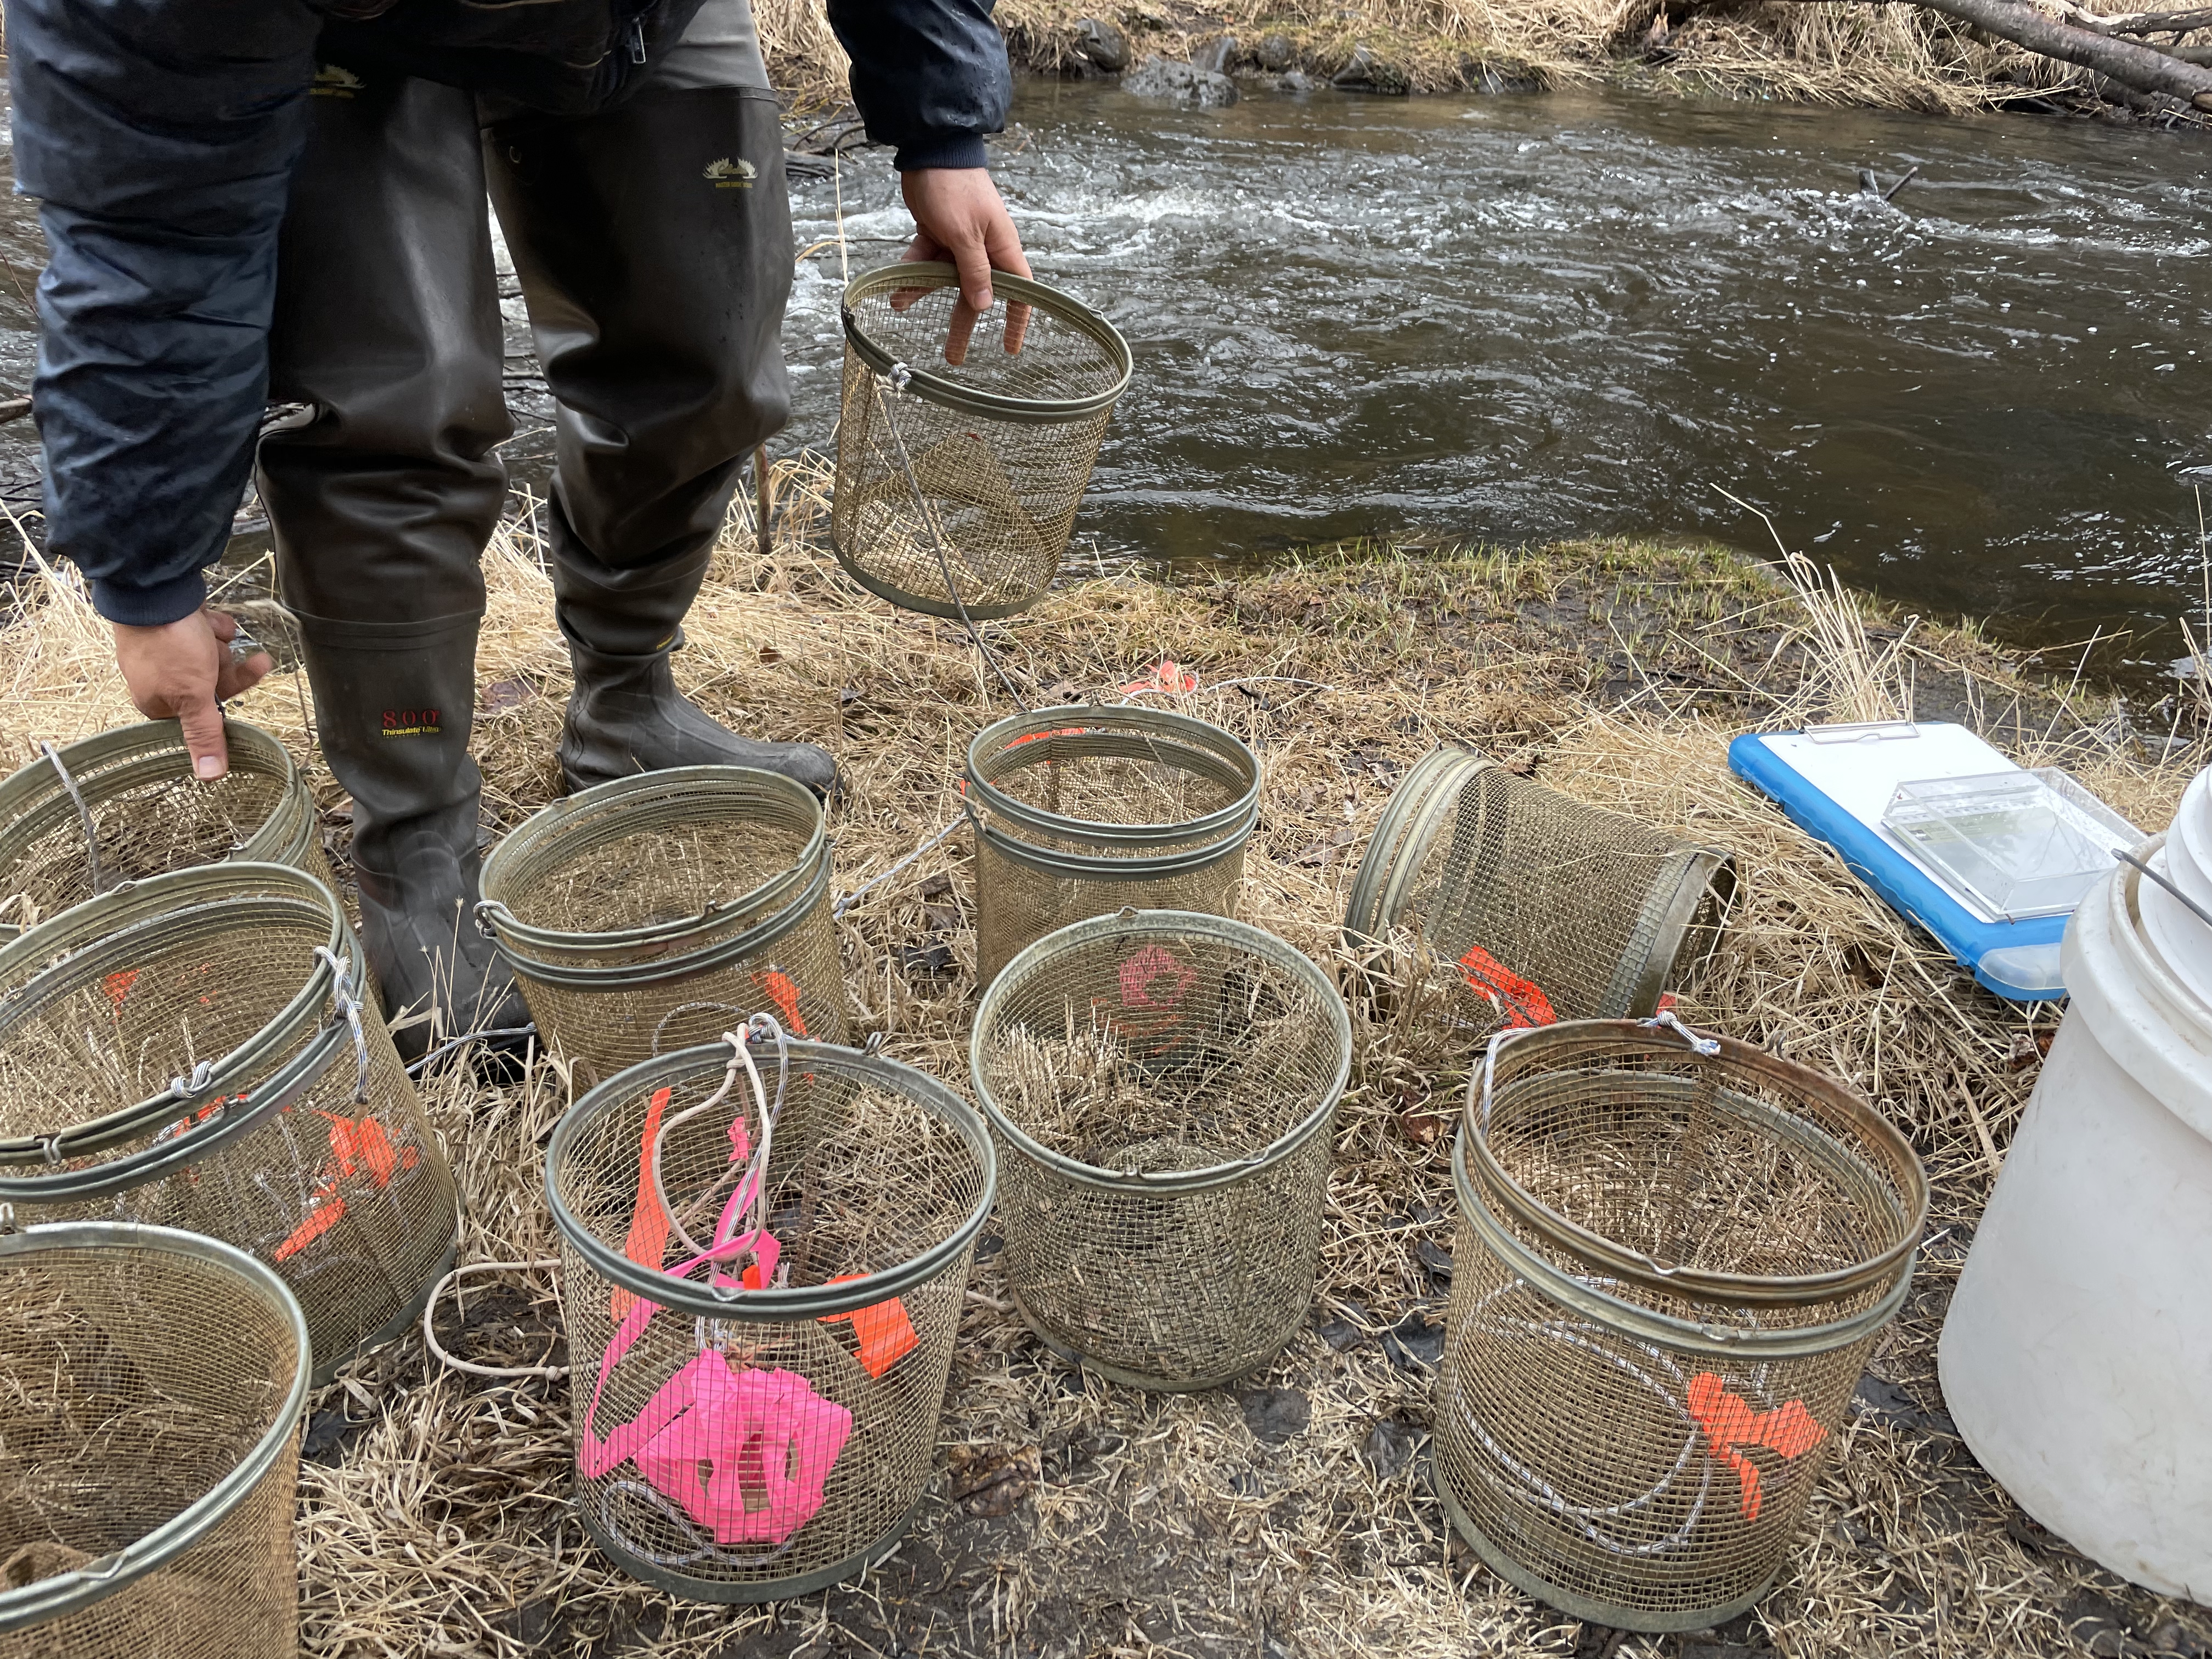 Minnow traps being prepared at by Trout Unlimited volunteers at a training workshop at Soldotna Creek in June 2021